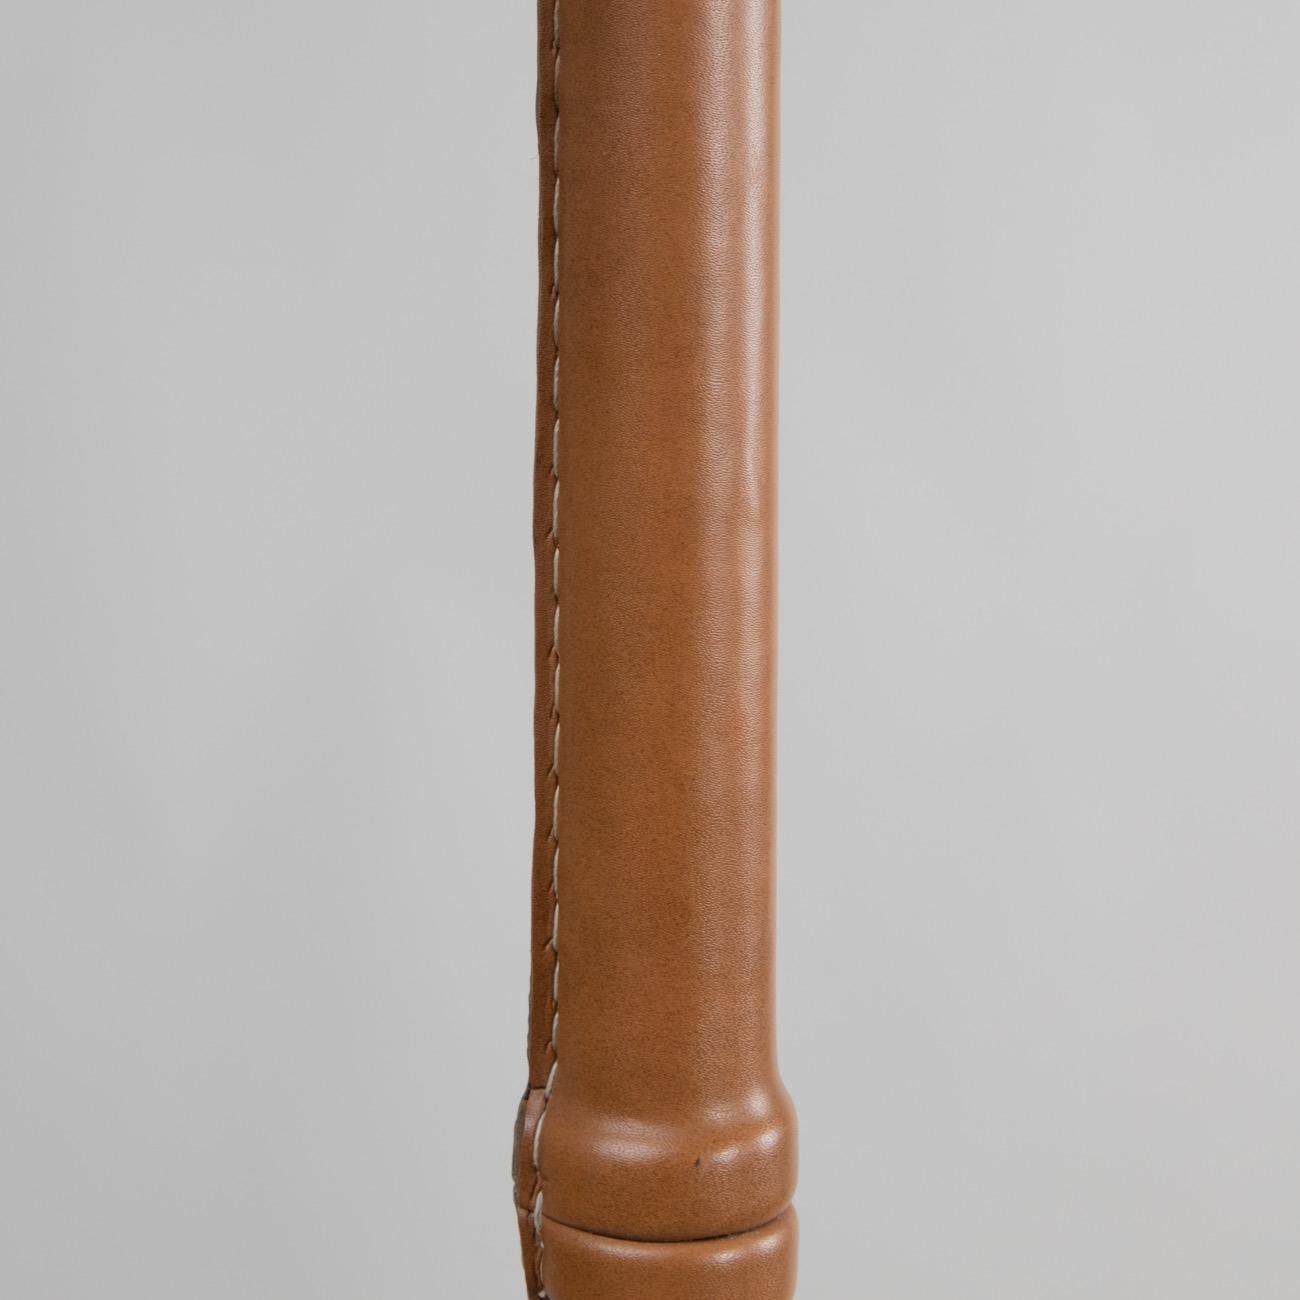 Mid-20th Century Metal Coat Rack Covered with Fawn-Colored Synthetic Leather, Jacques Adnet For Sale